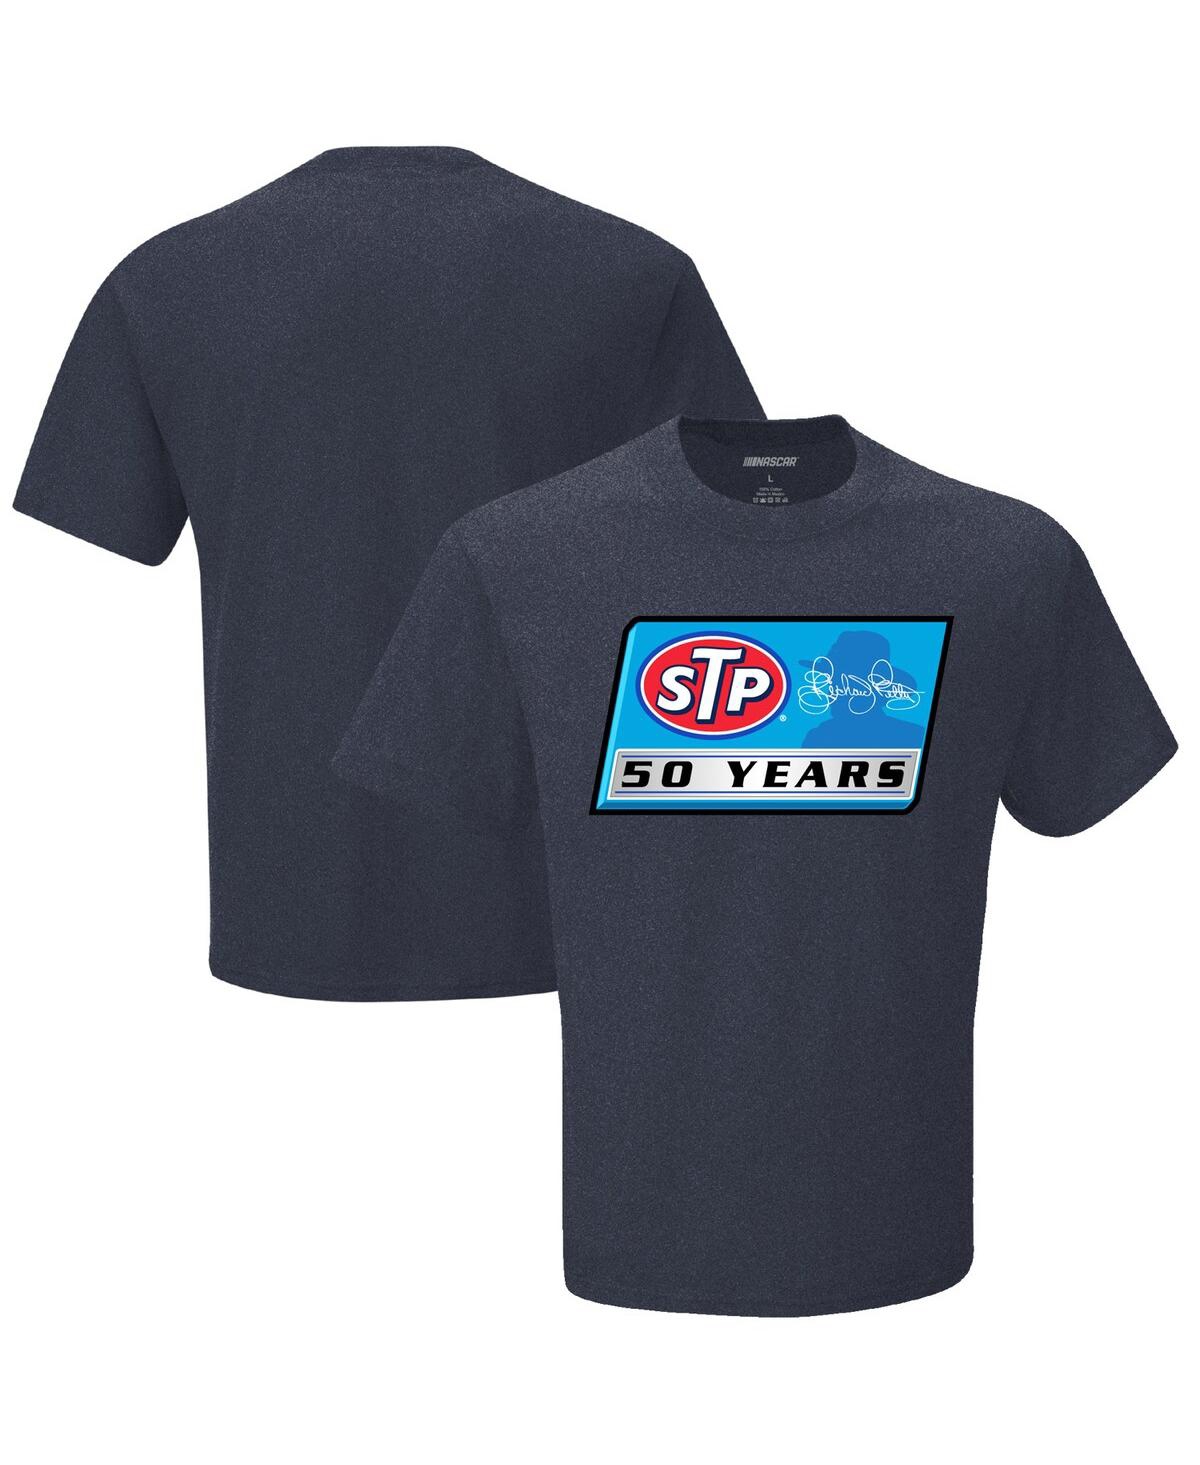 Checkered Flag Sports Men's Checkered Flag Heather Navy Richard Petty Vintage-Inspired Duel T-shirt